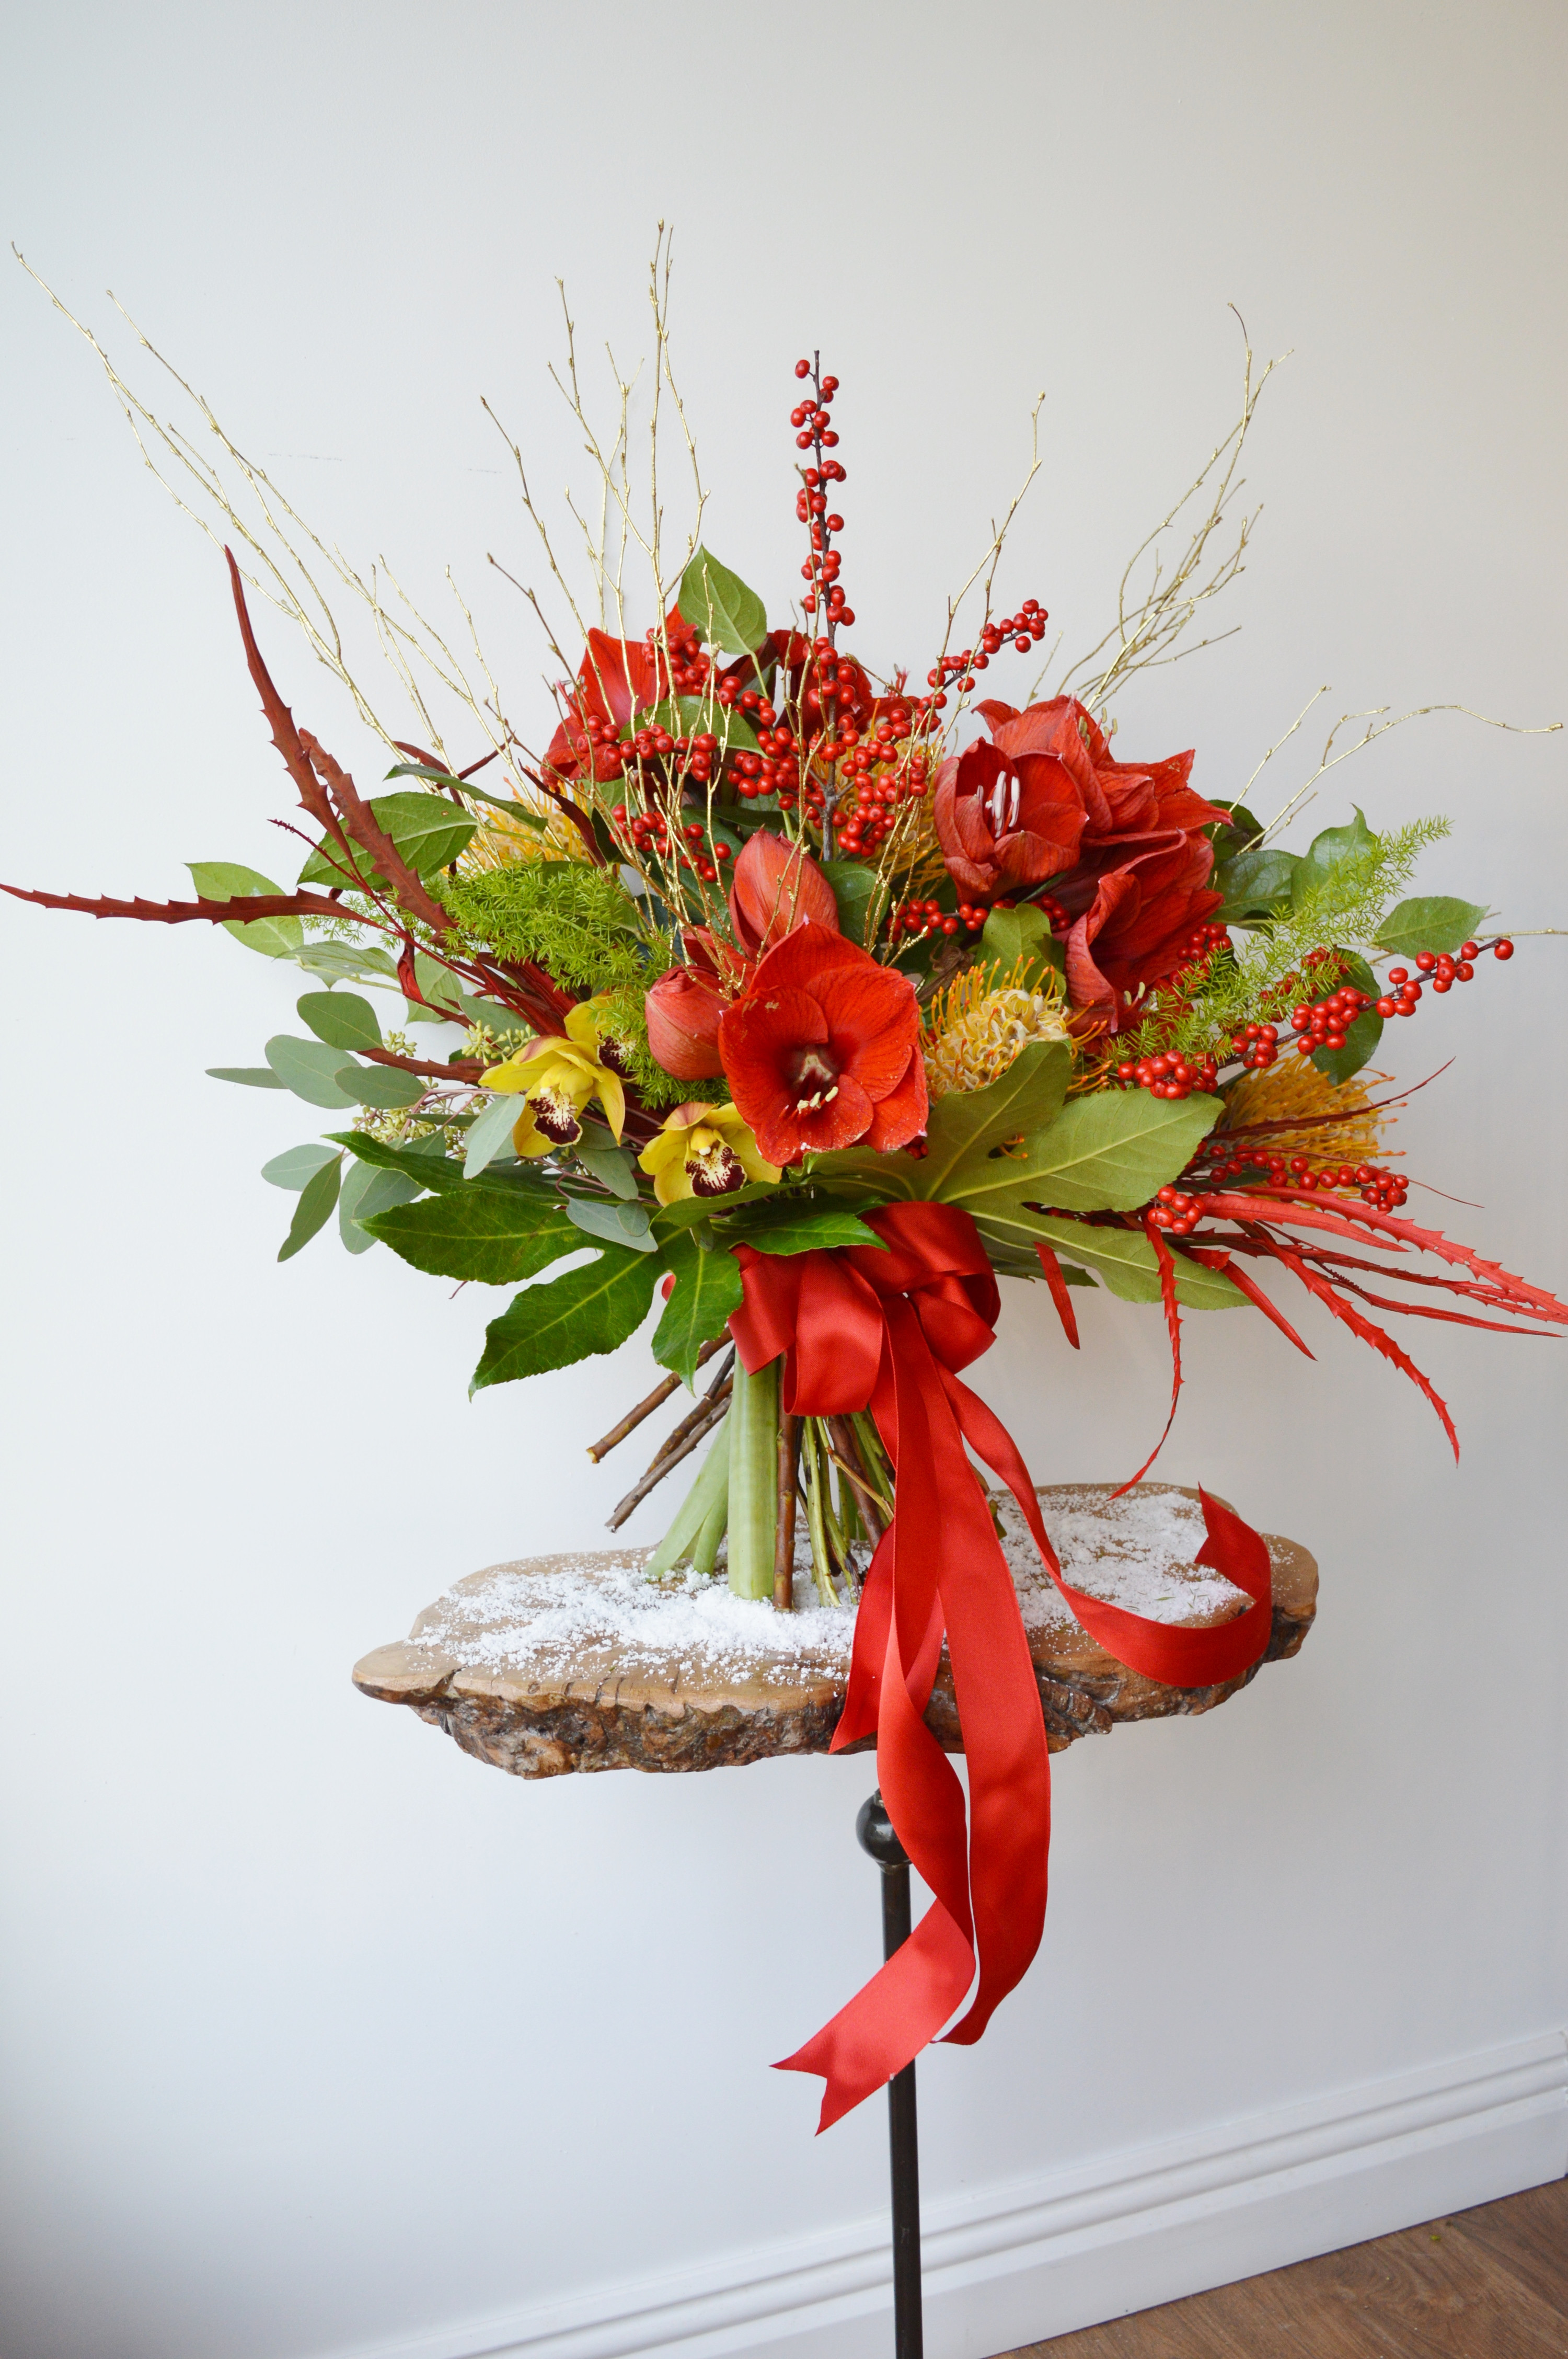 Christmas Flower Delivery
 Home Wild & Wondrous flower delivery Bolton